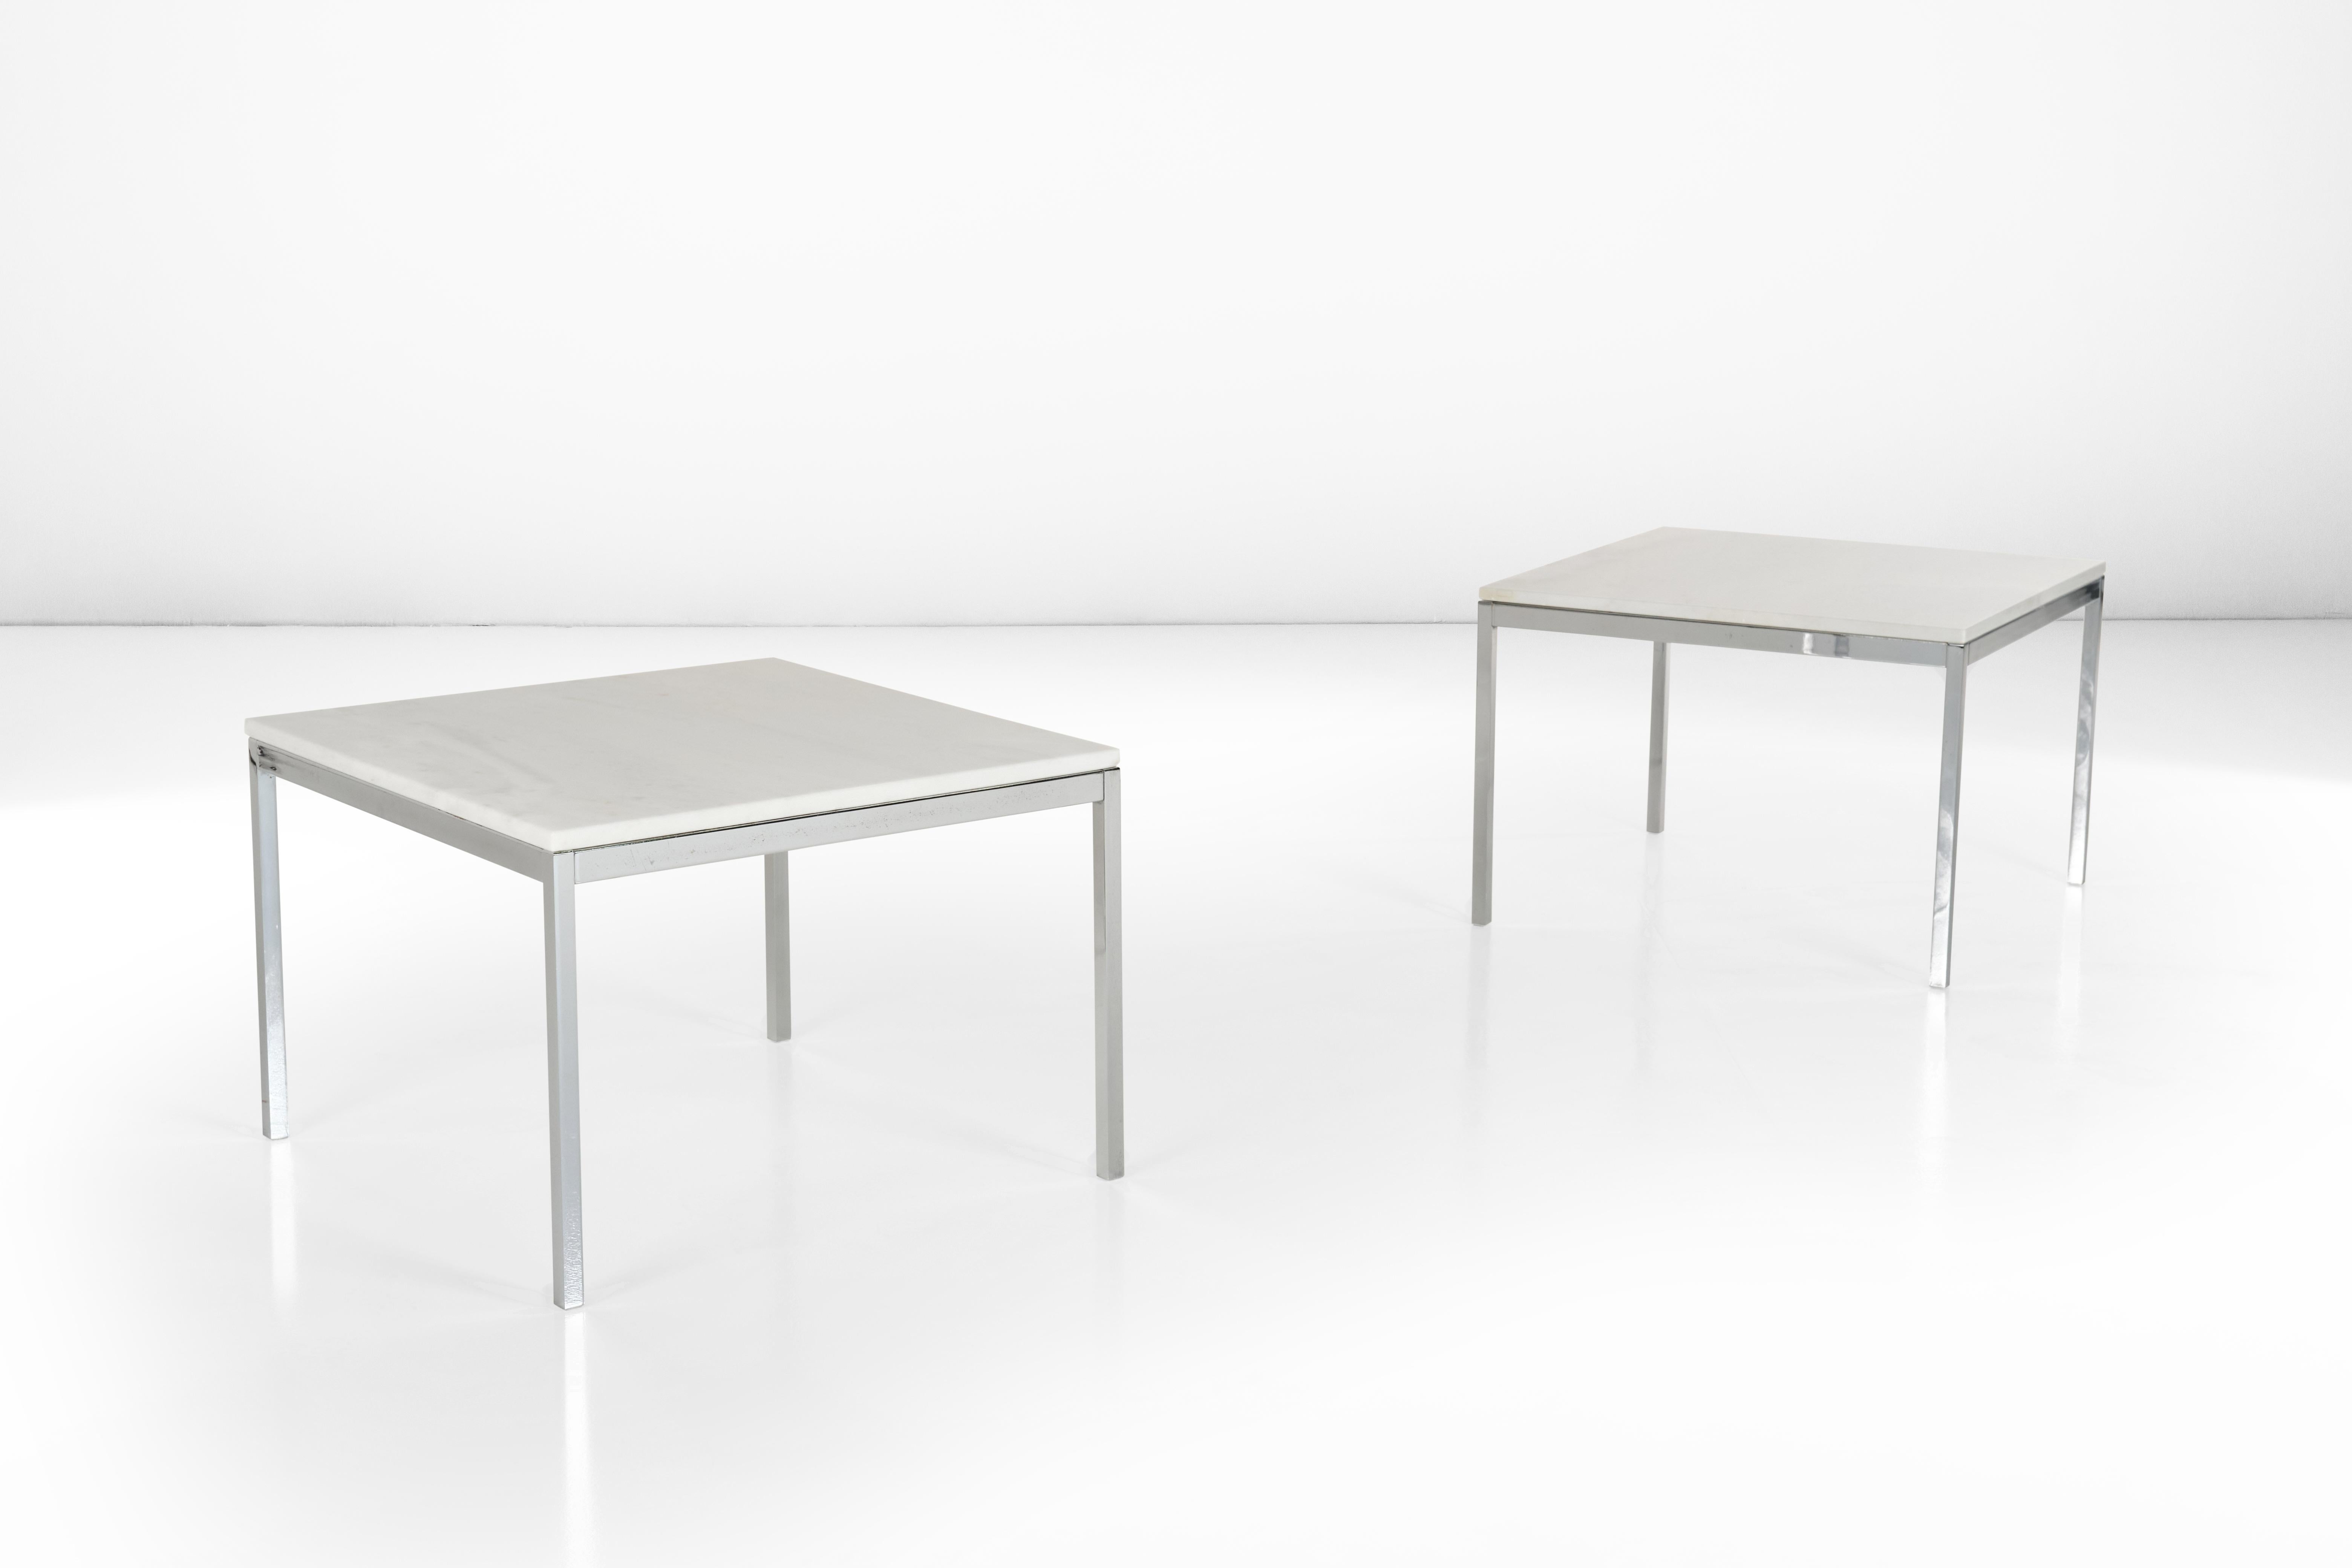 This set of two low tables with steel structure and white marble top is a testimony to the design influence of Florence Knoll and the diffusion that this had in italy, the place of origin of this set. Consistent with all its designs, the table has a